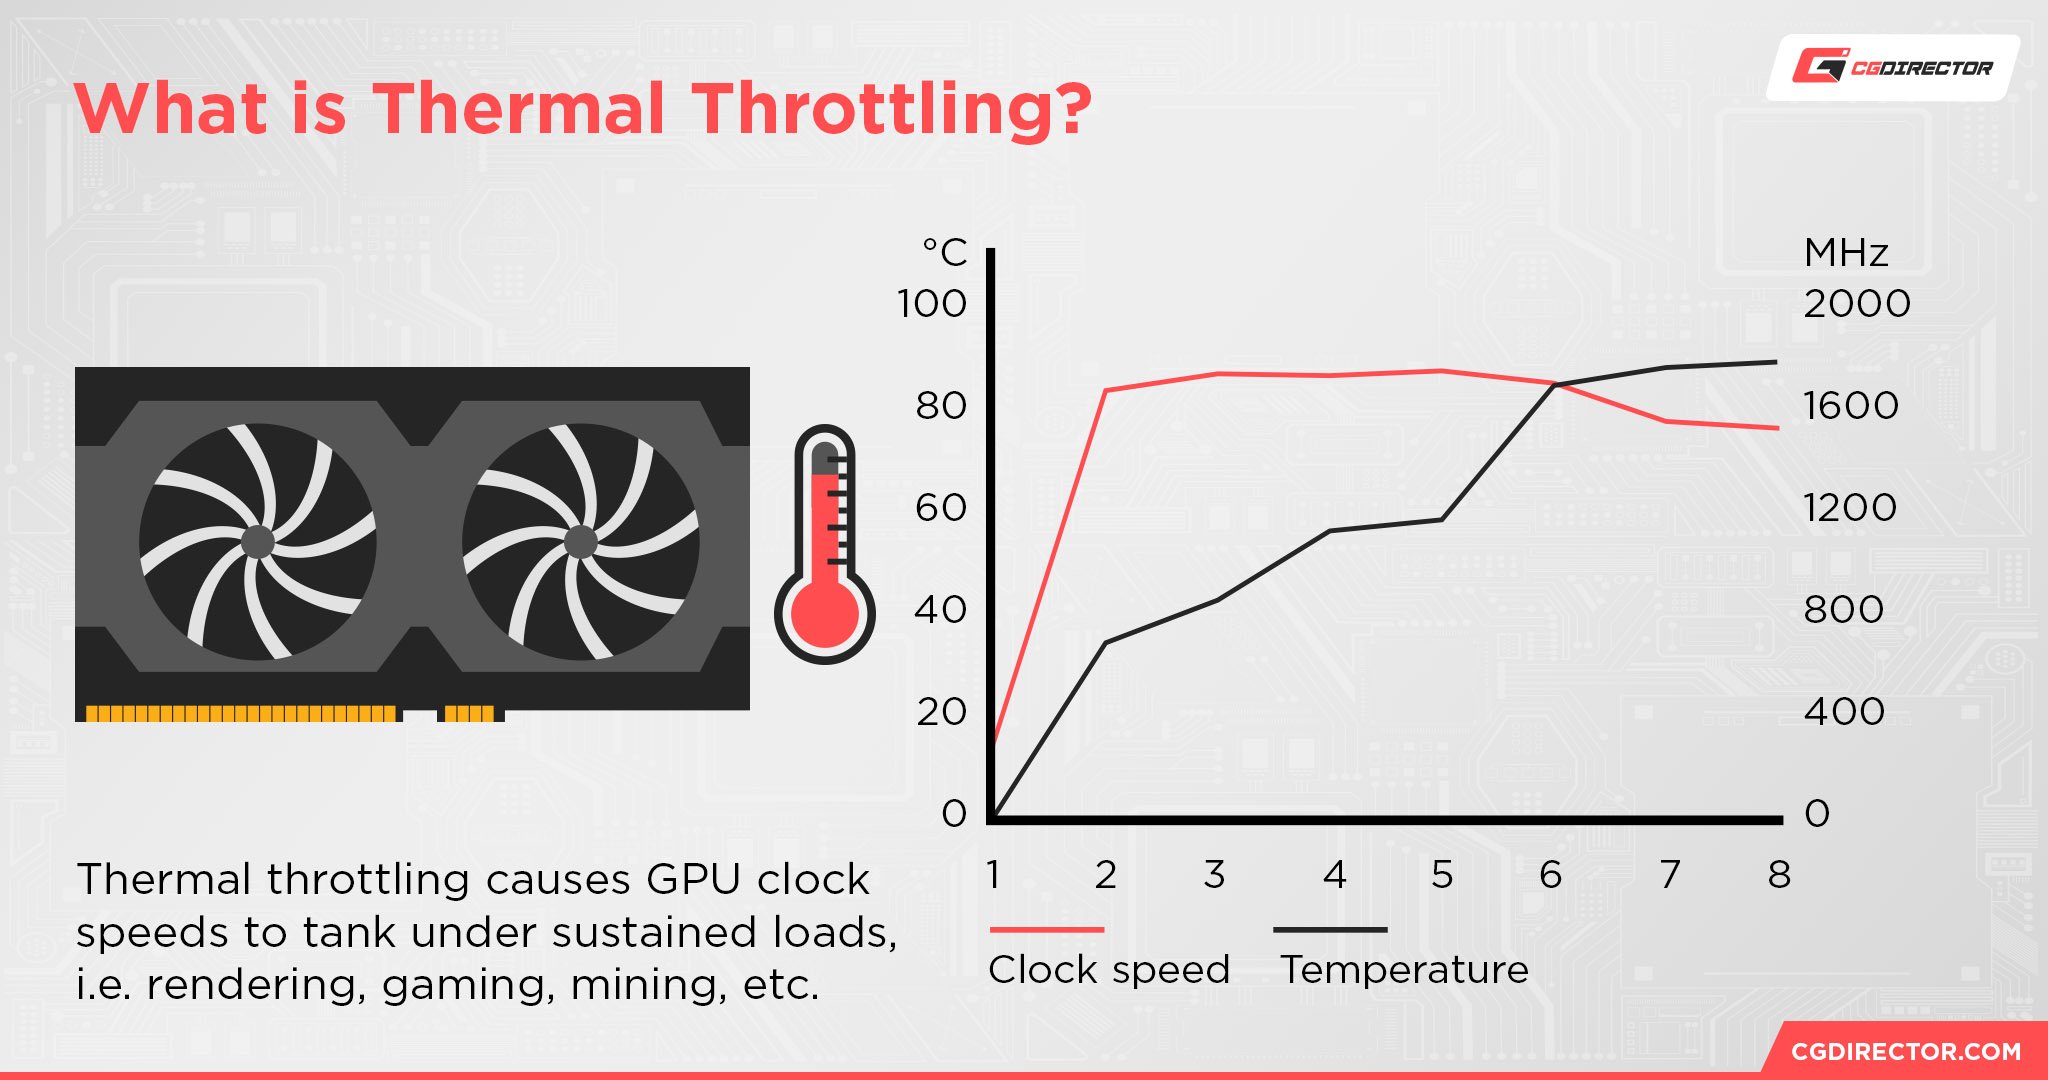 What is thermal throttling